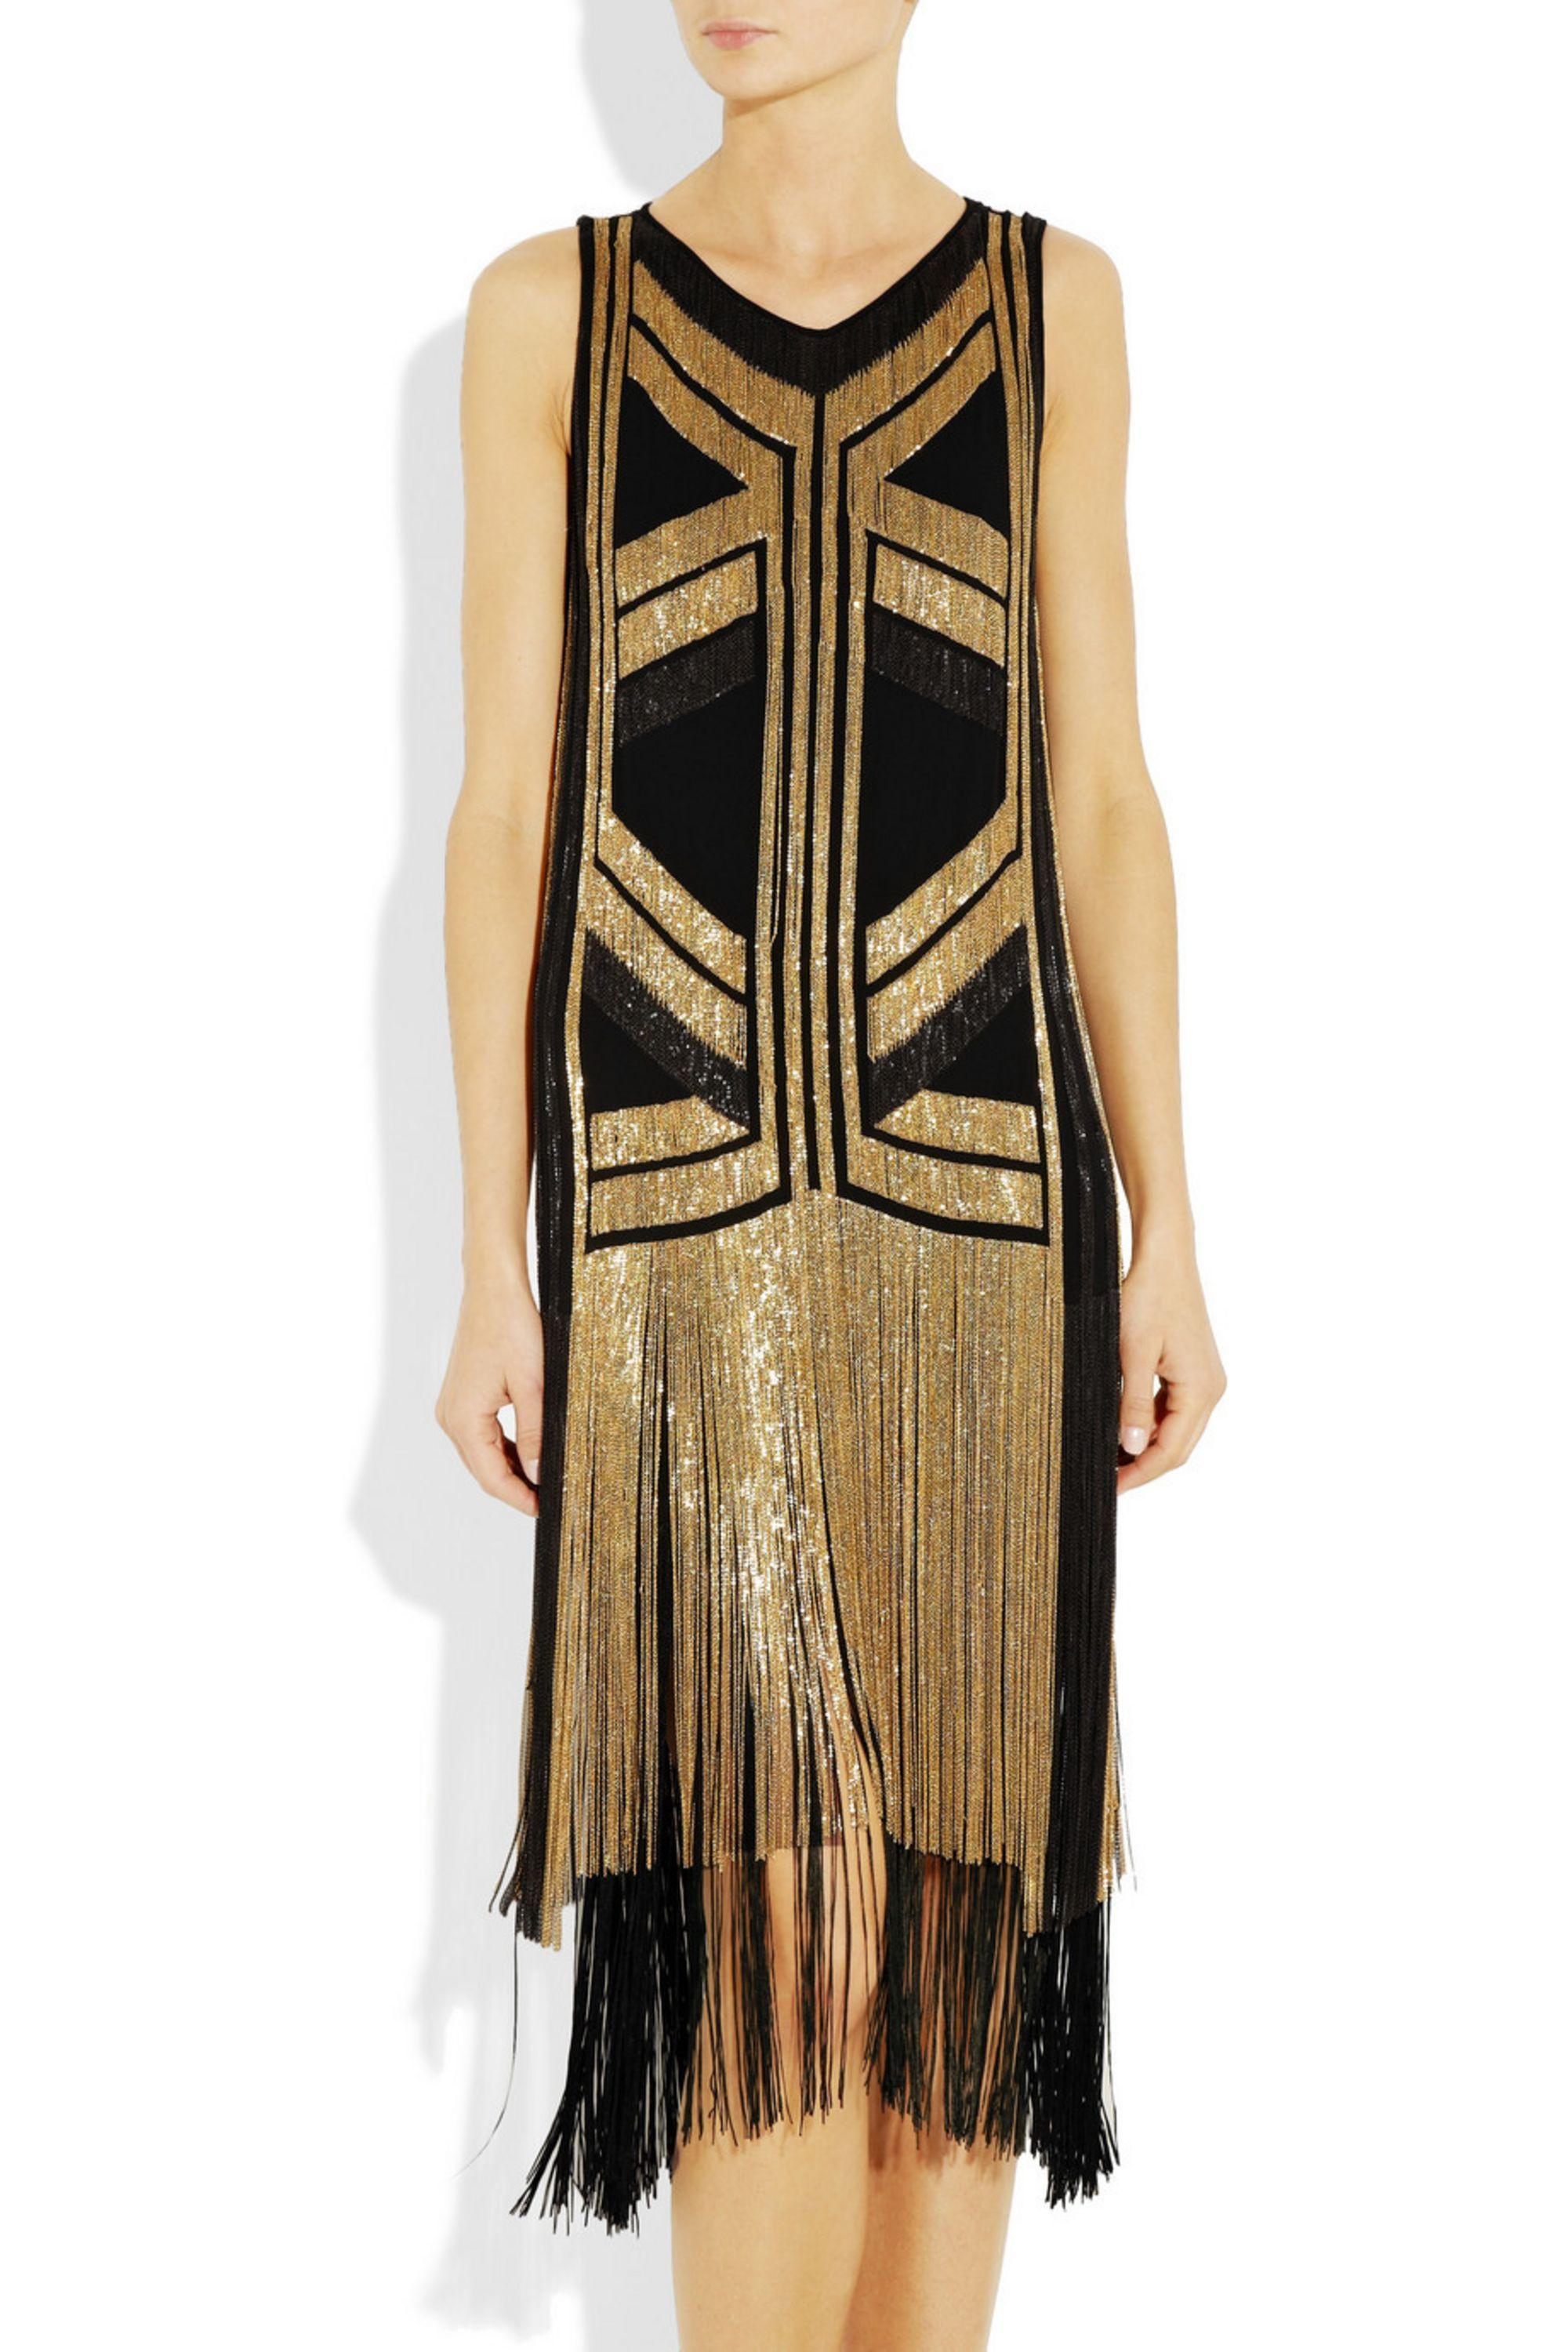 Rare Gucci Fringed chain-embellished silk dress as seen on Taylor Swift 1